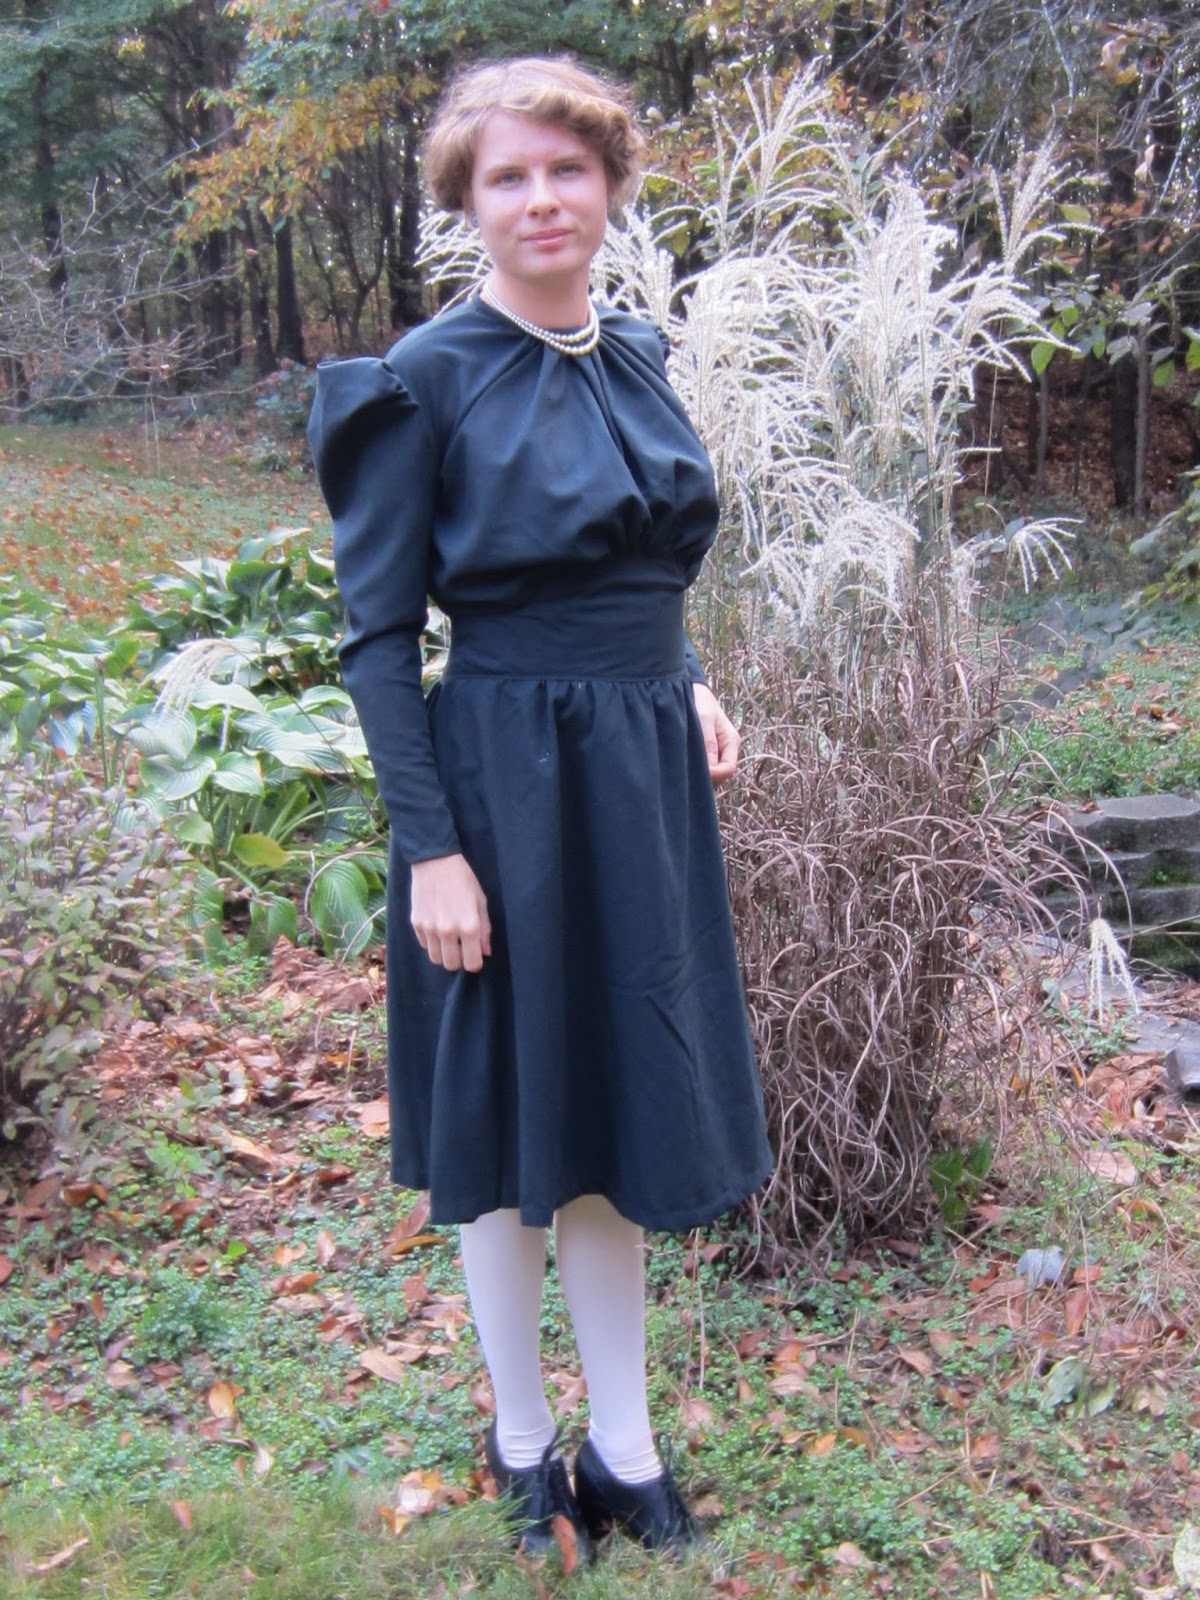 The Ugly Dame : A Black Wool Dress . . and a Furry Friend Too